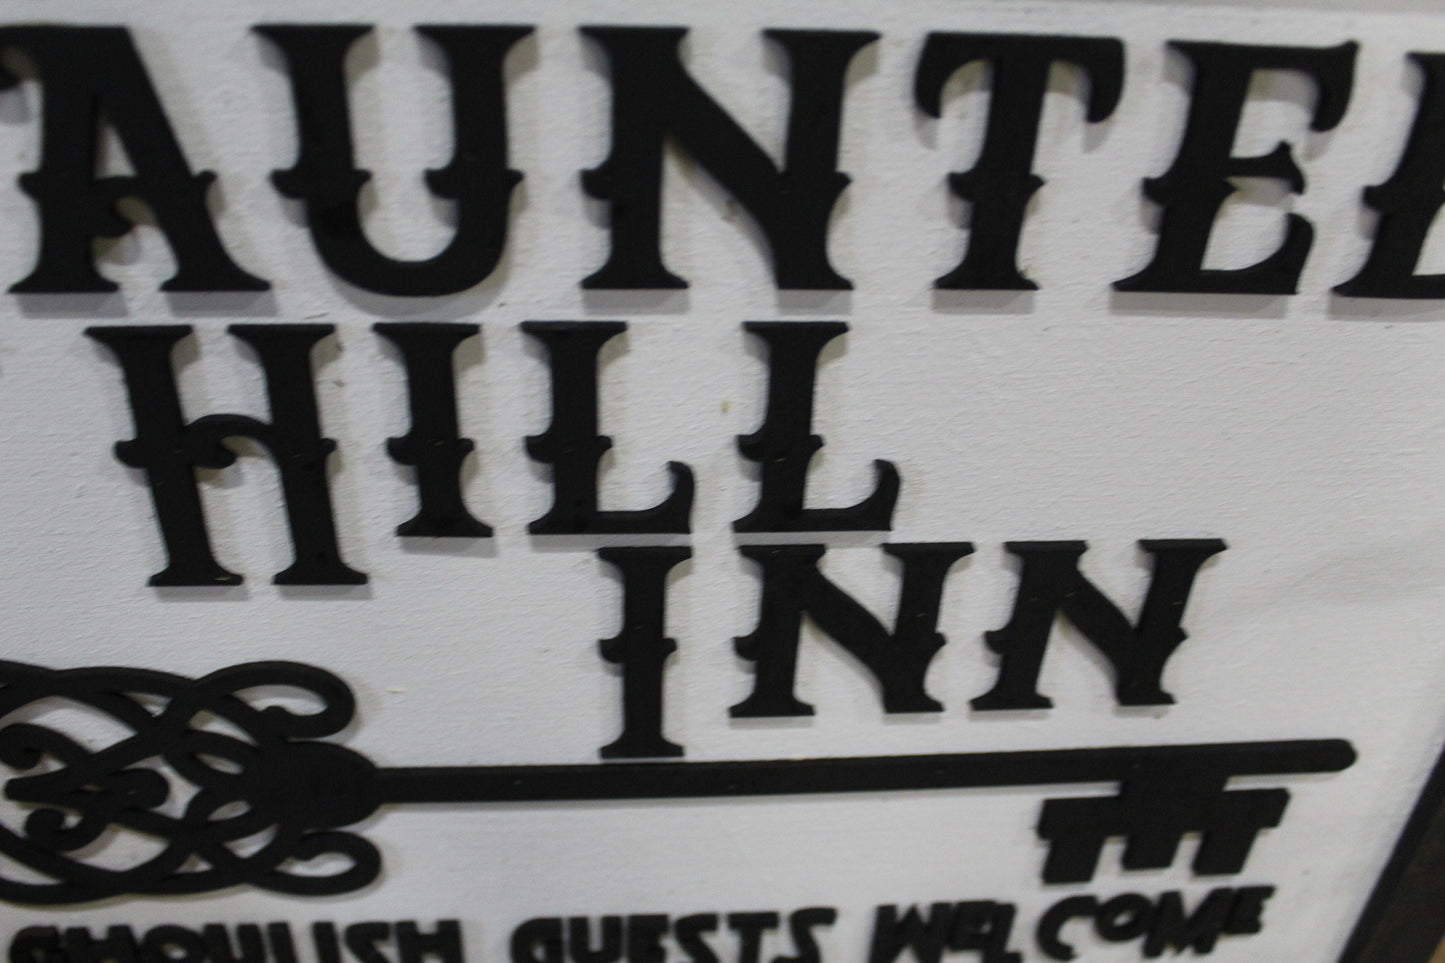 Haunted Hill Inn Sign Ghoul Ghosts Key Black White Guest Welcome Entry Small Rectangle Wood Rustic Scary Fun Artwork 3D Raised Lettering